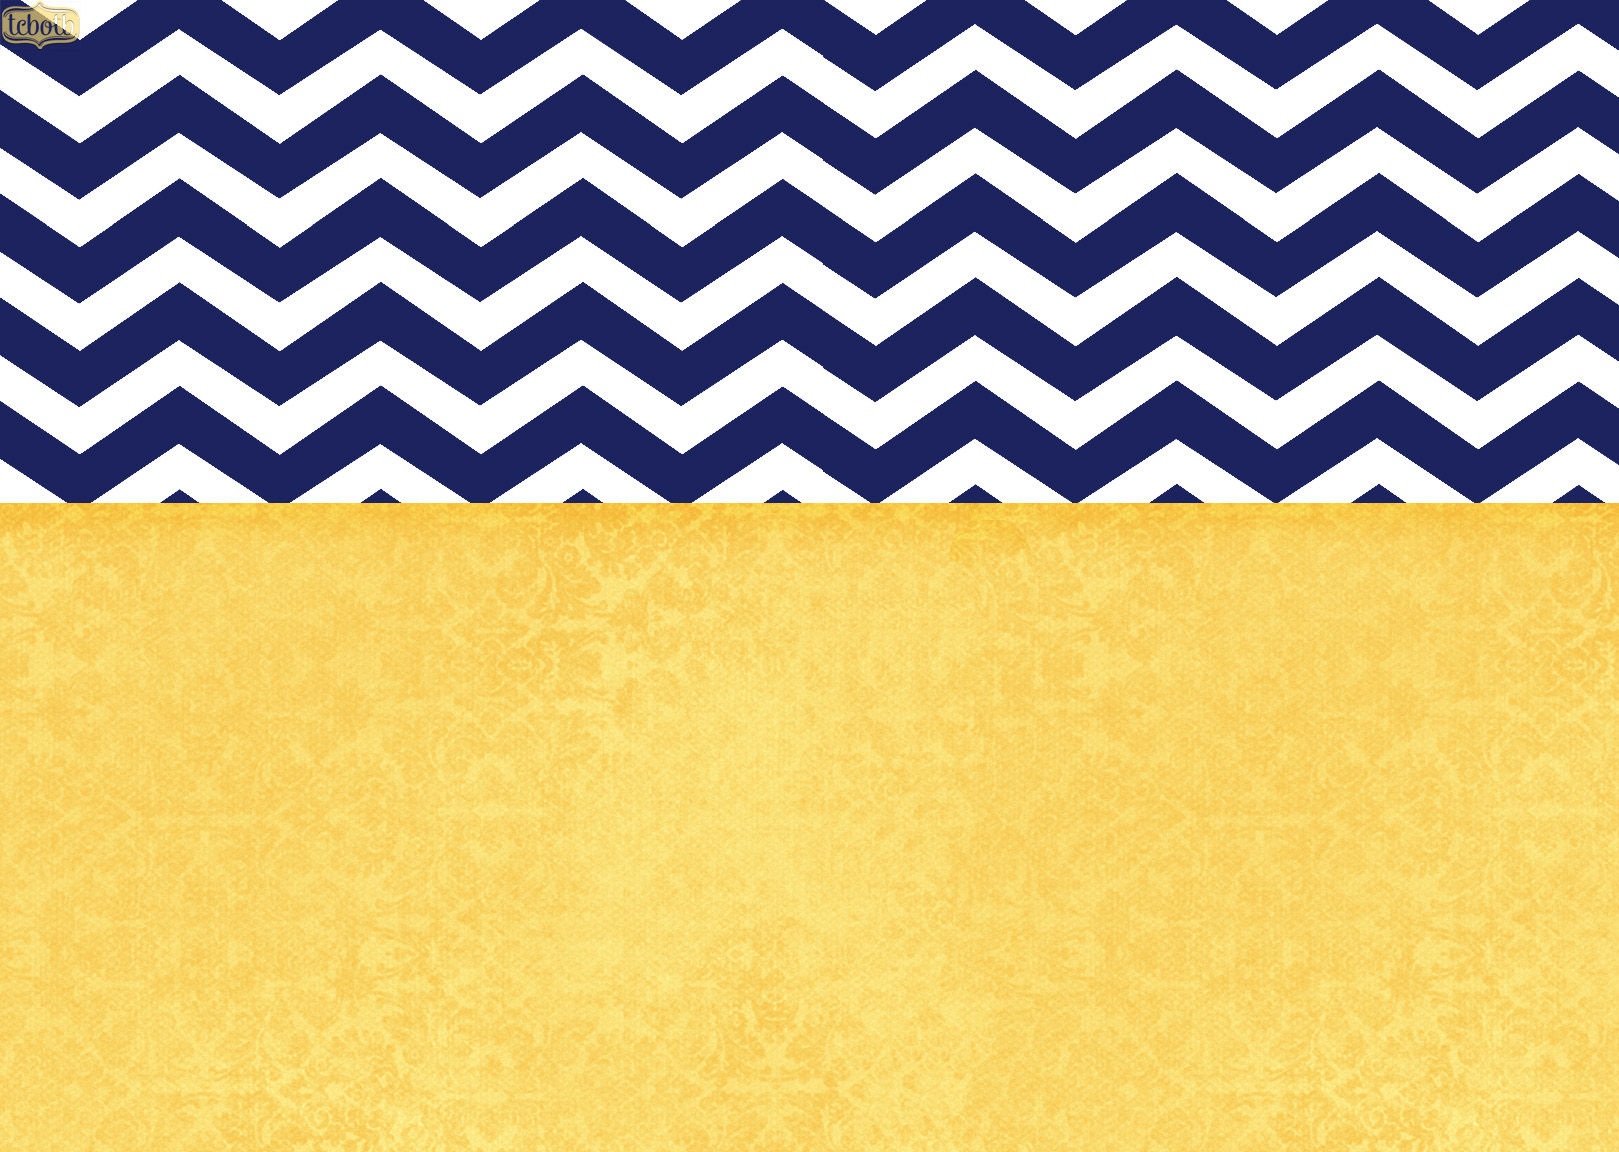 Chevron Background For Pc Android iPhone And iPad Wallpaper